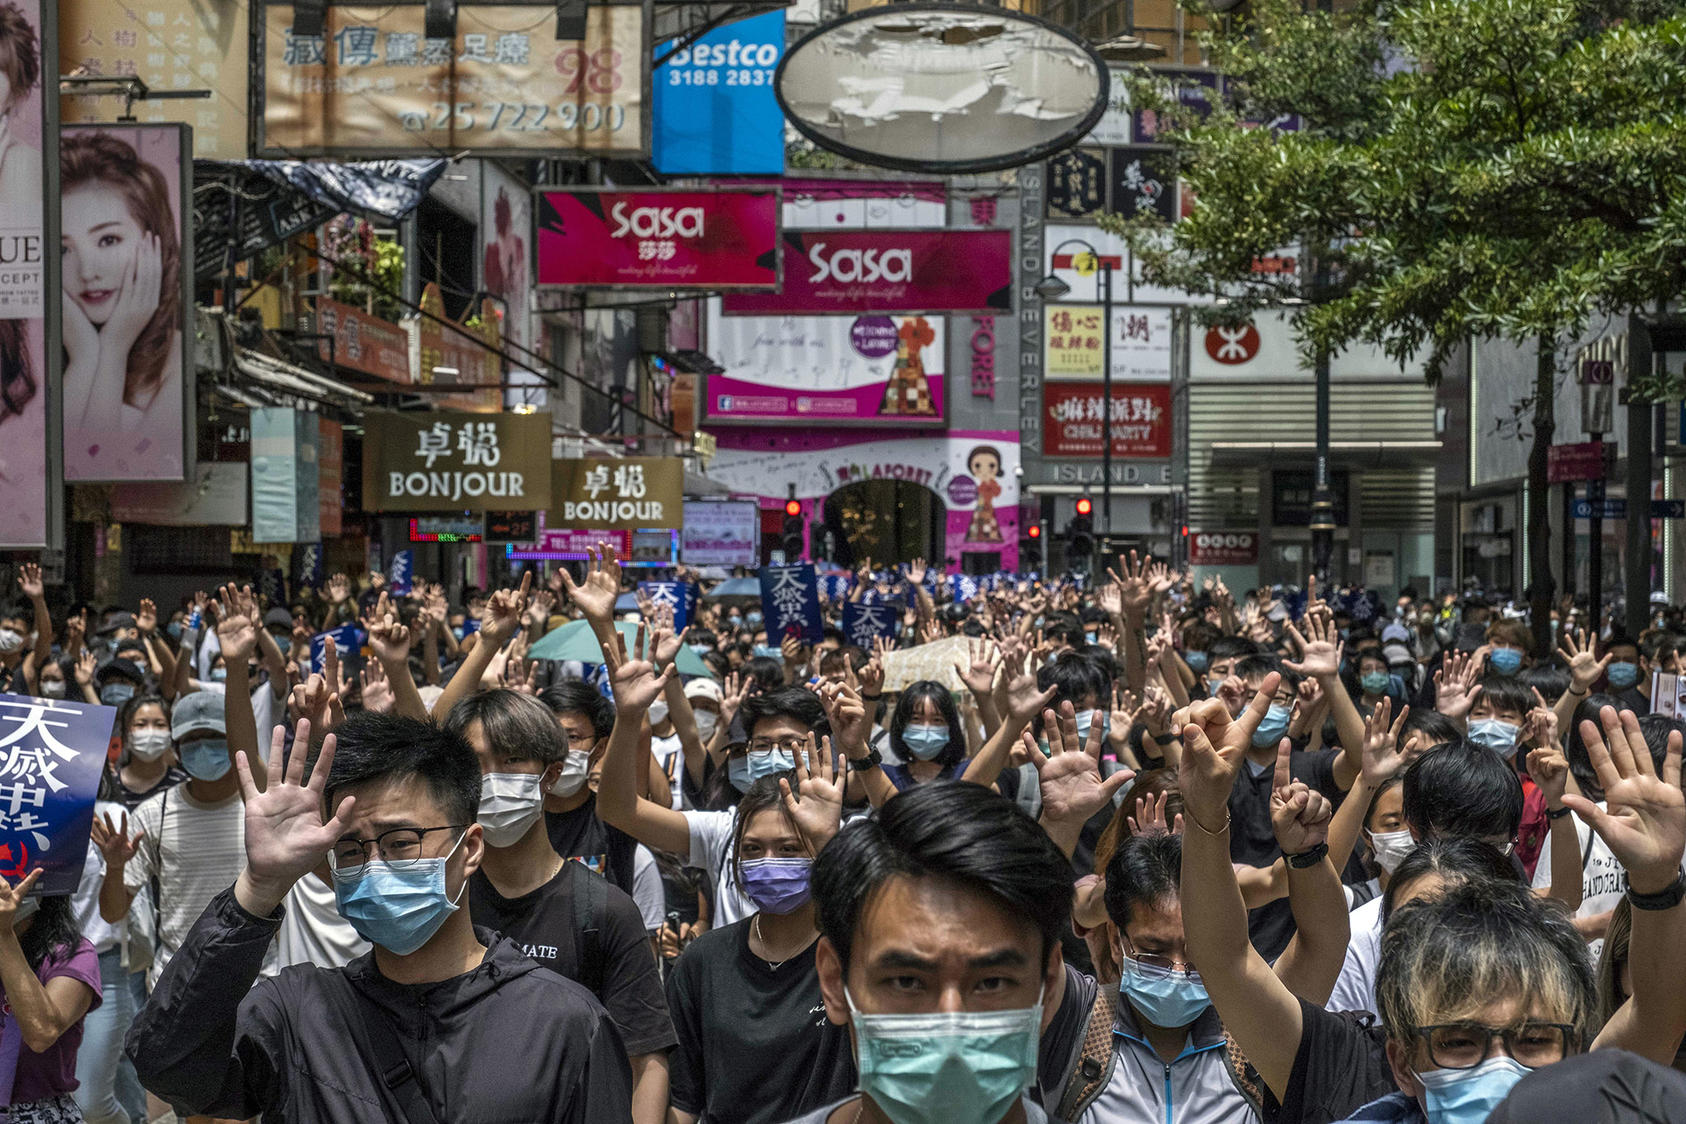 Anti-government protesters march in Hong Kong on Sunday, May 24, 2020. (Lam Yik Fei/New York Times)